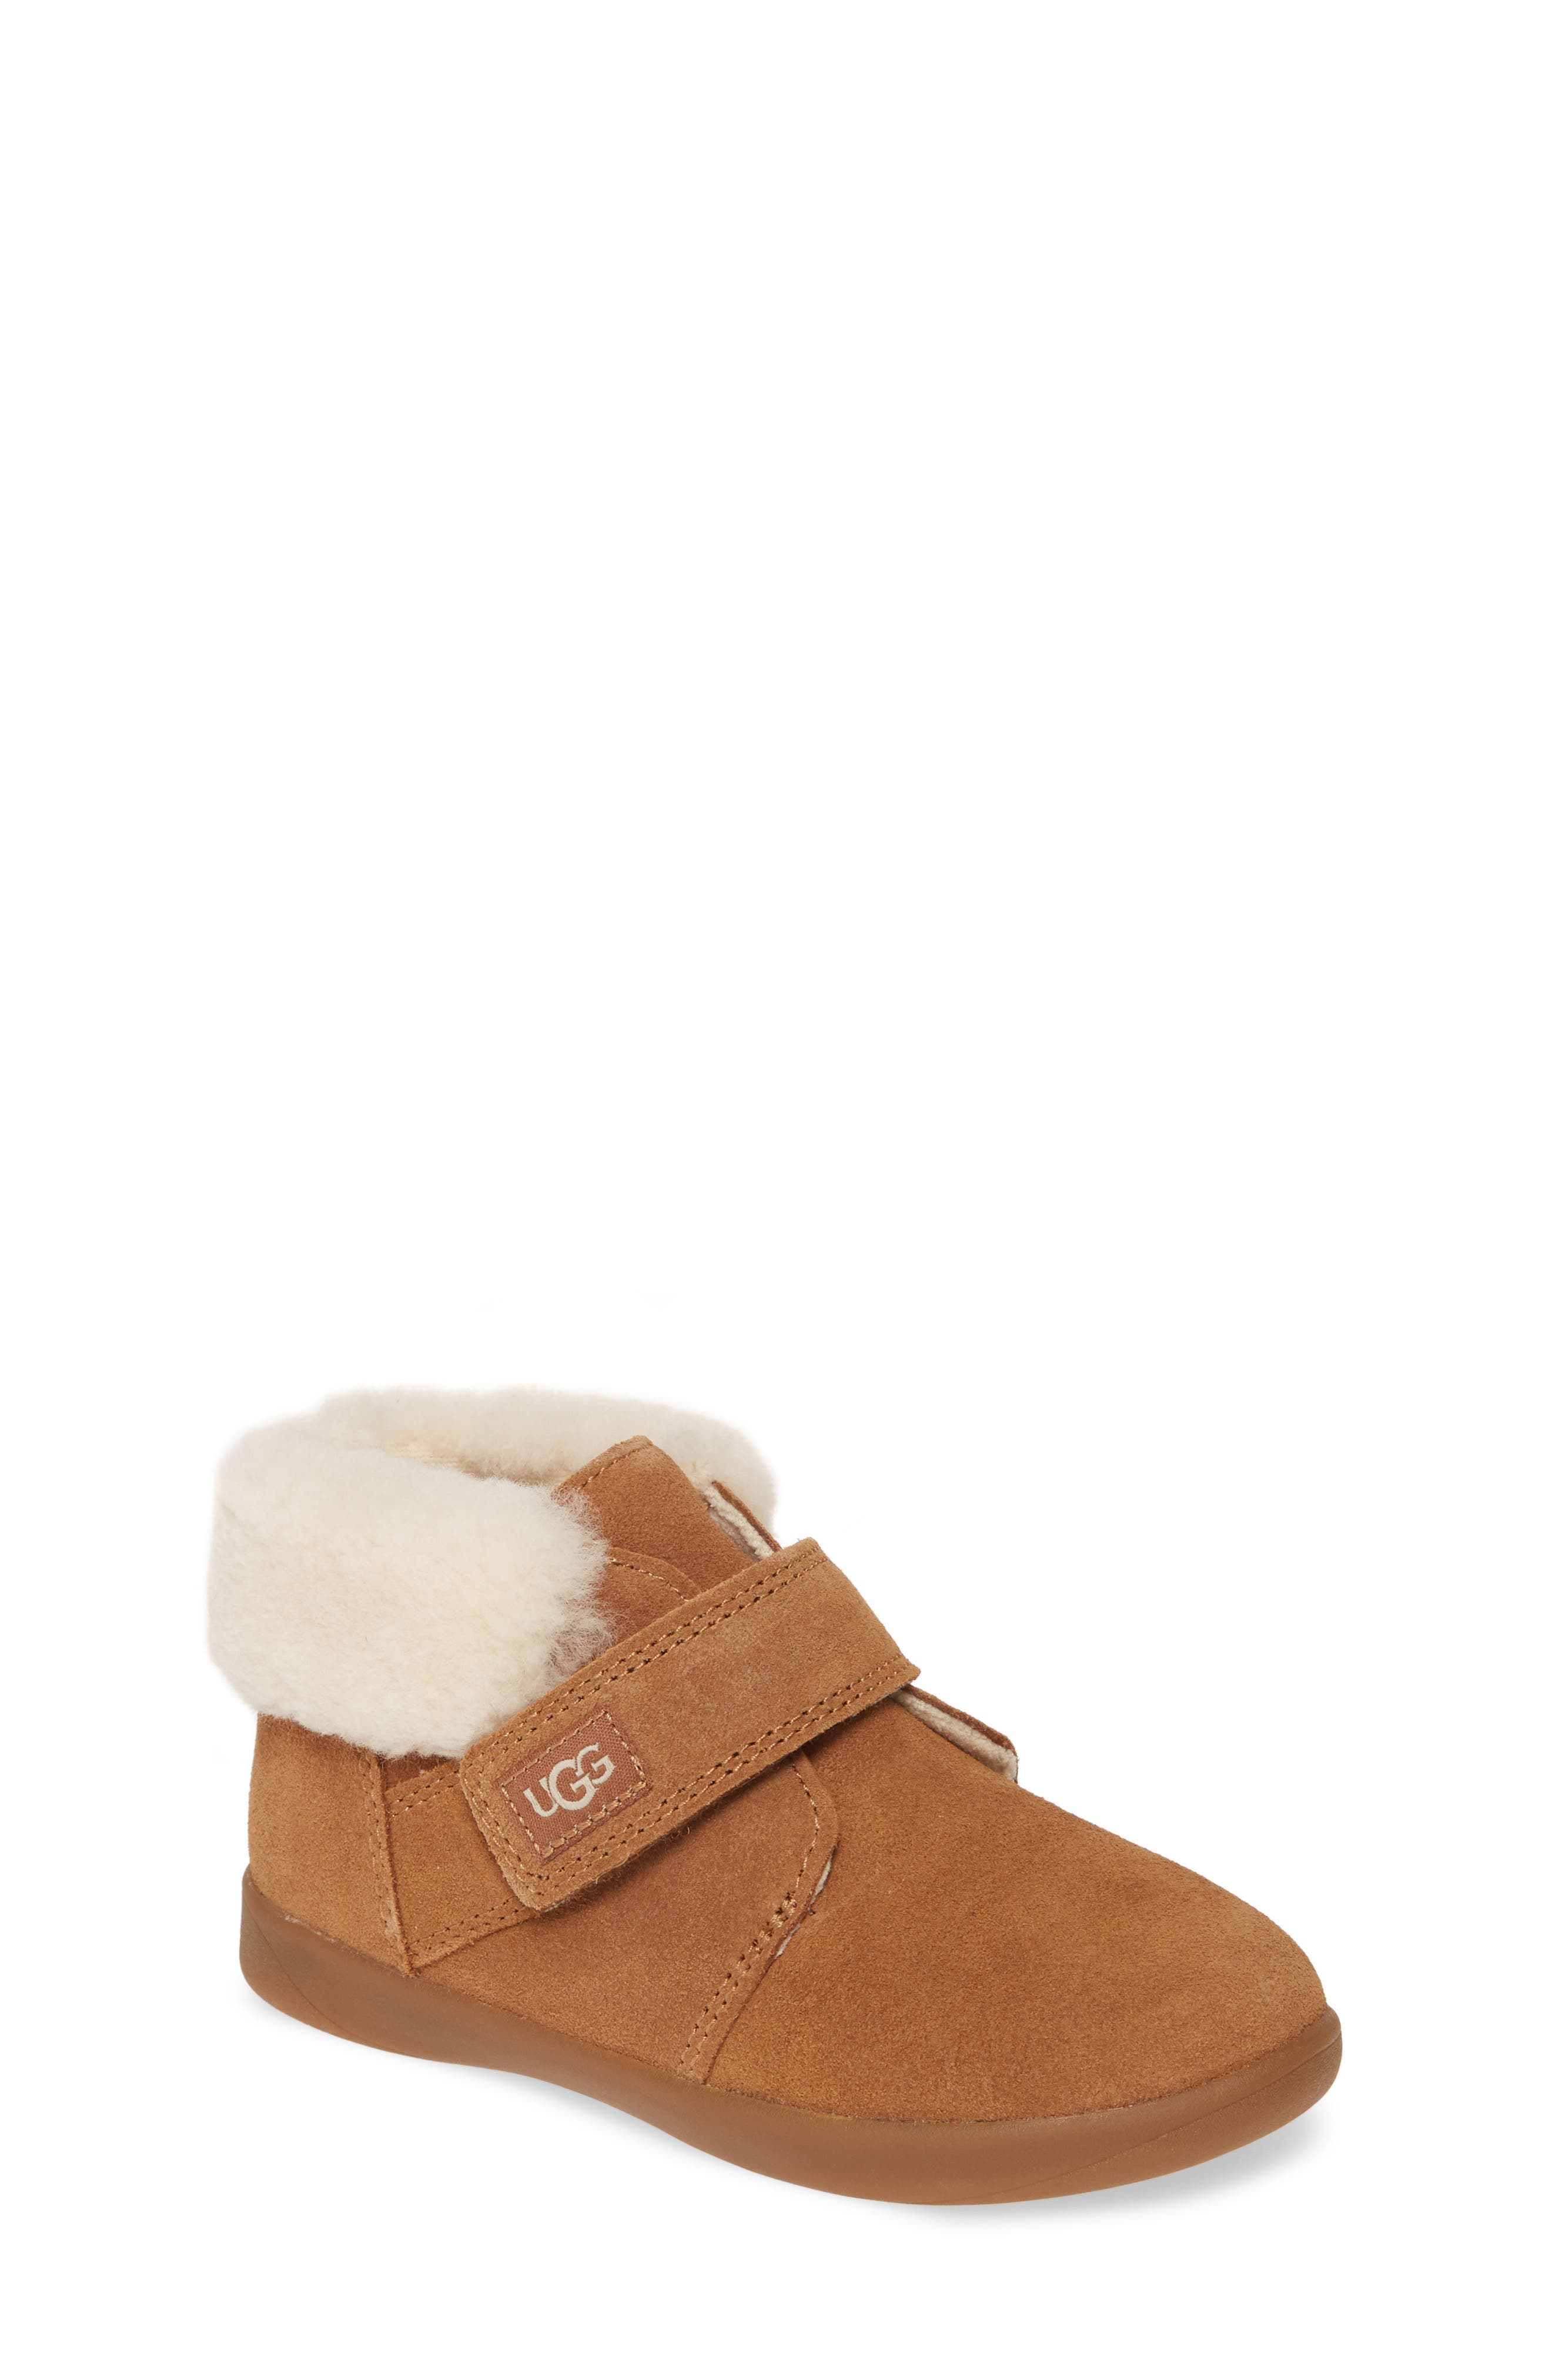 uggs size 4 toddler